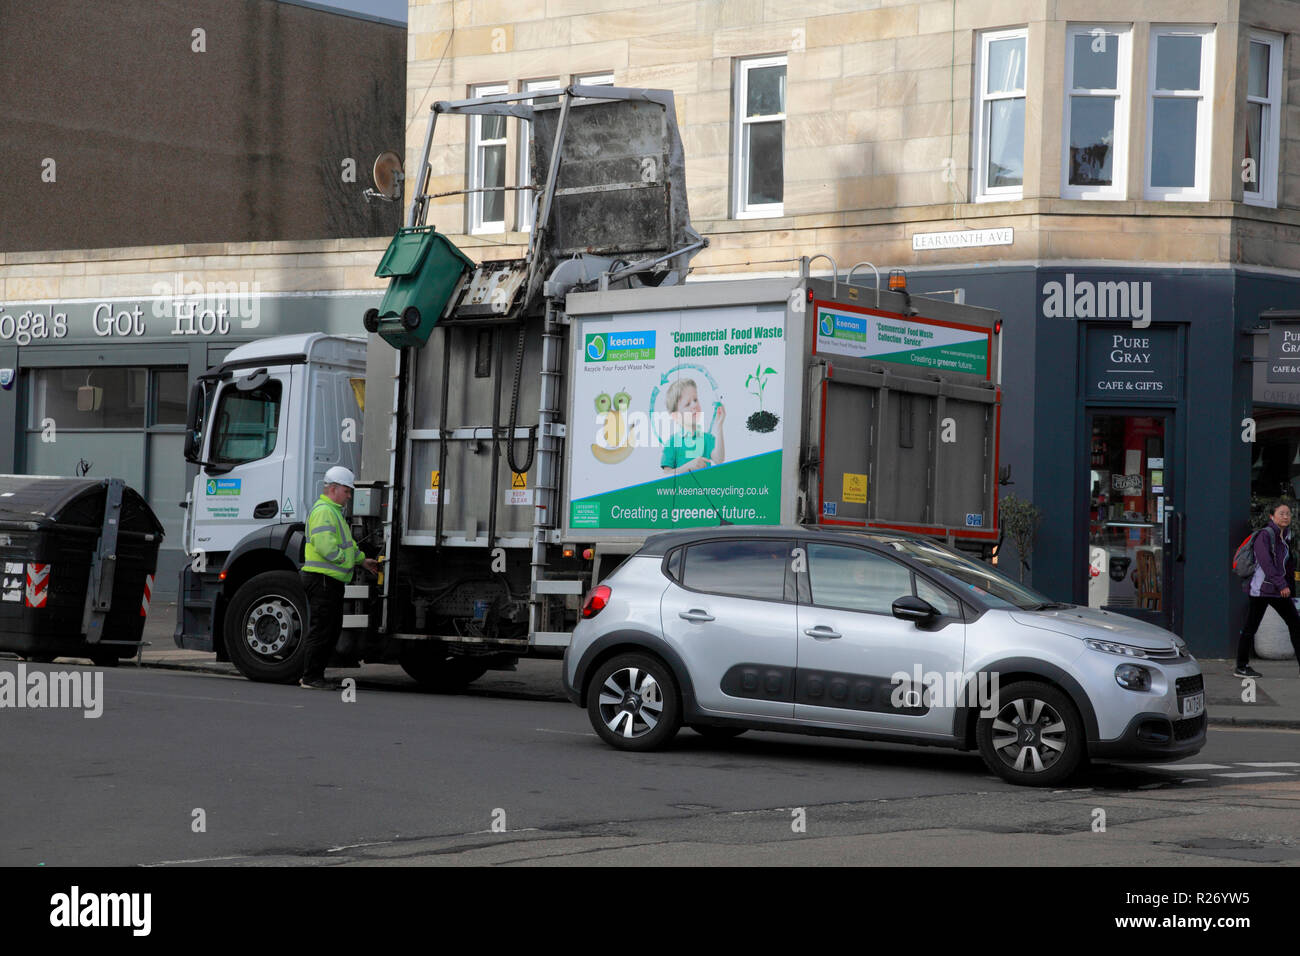 A green bin which has just emptied its contents into a bin lorry owned by Keenan Commercial Food Waste Collection Service Stock Photo